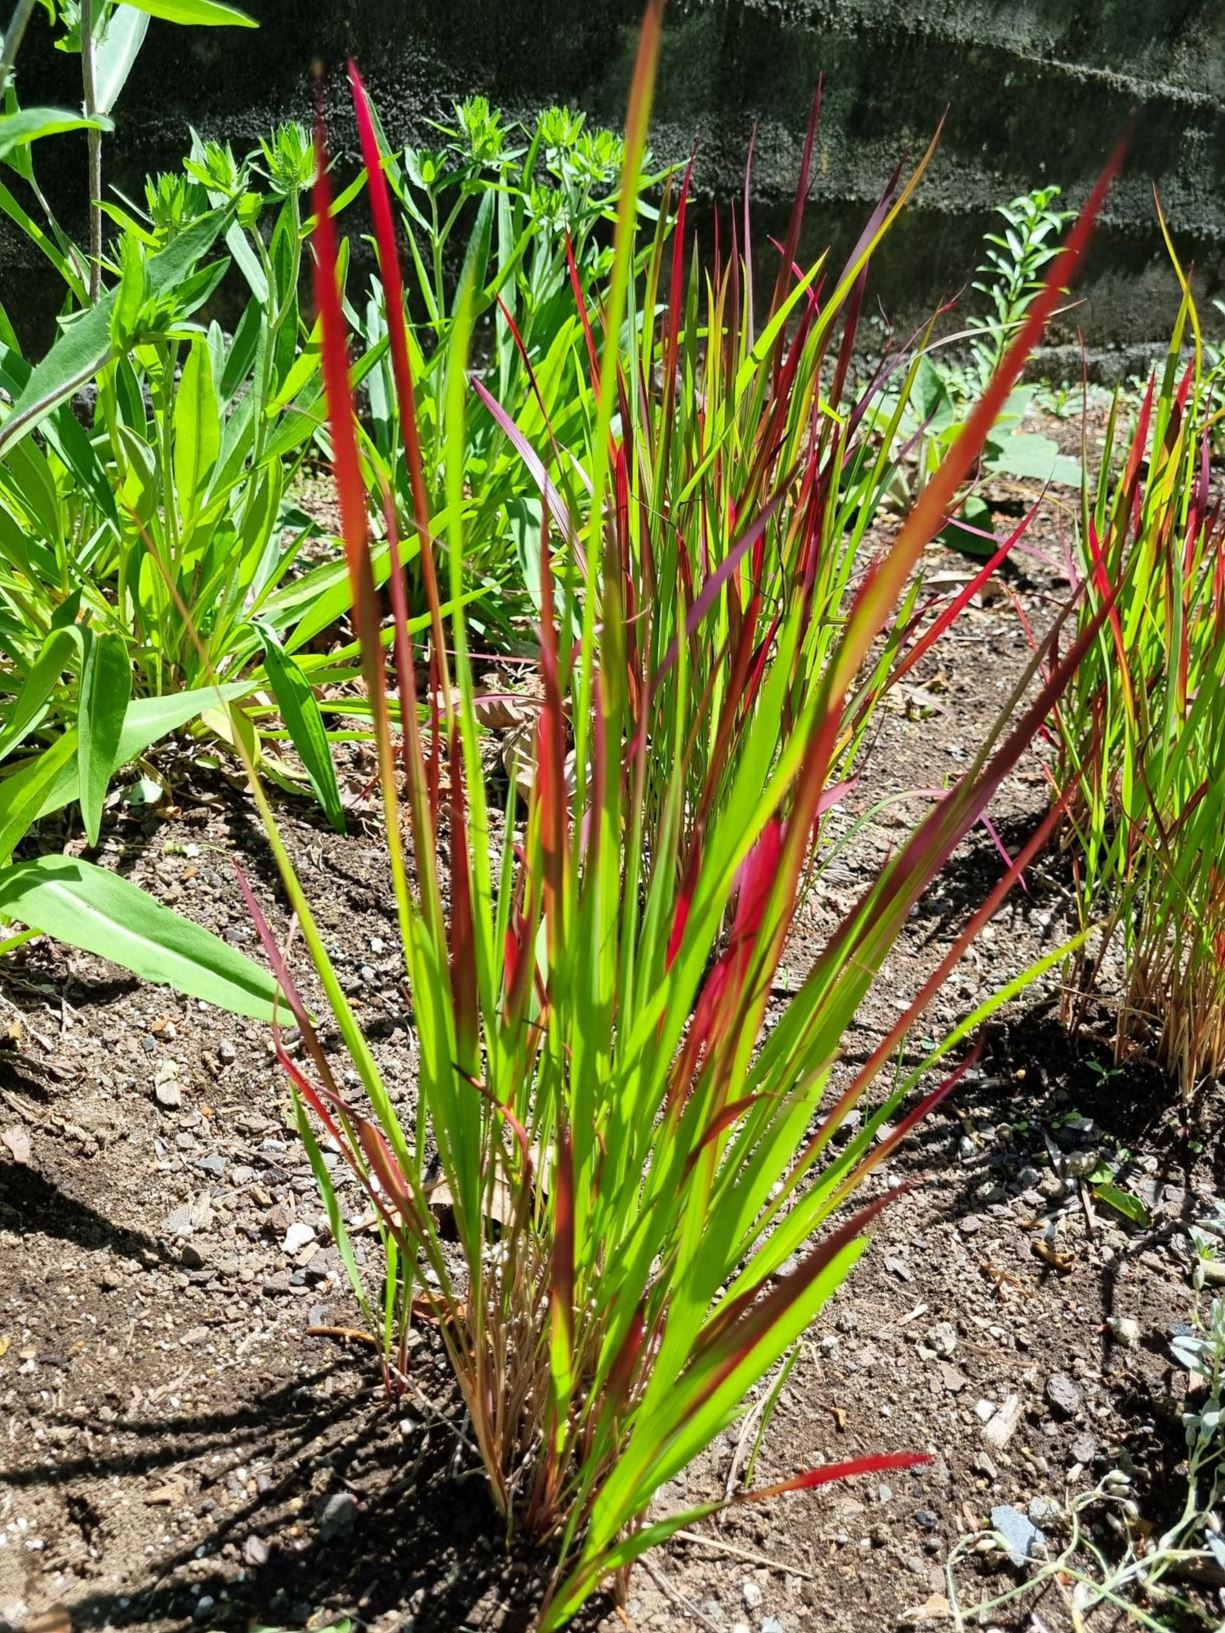 Imperata cylindrica 'Red Baron' - Japanese Blood Grass